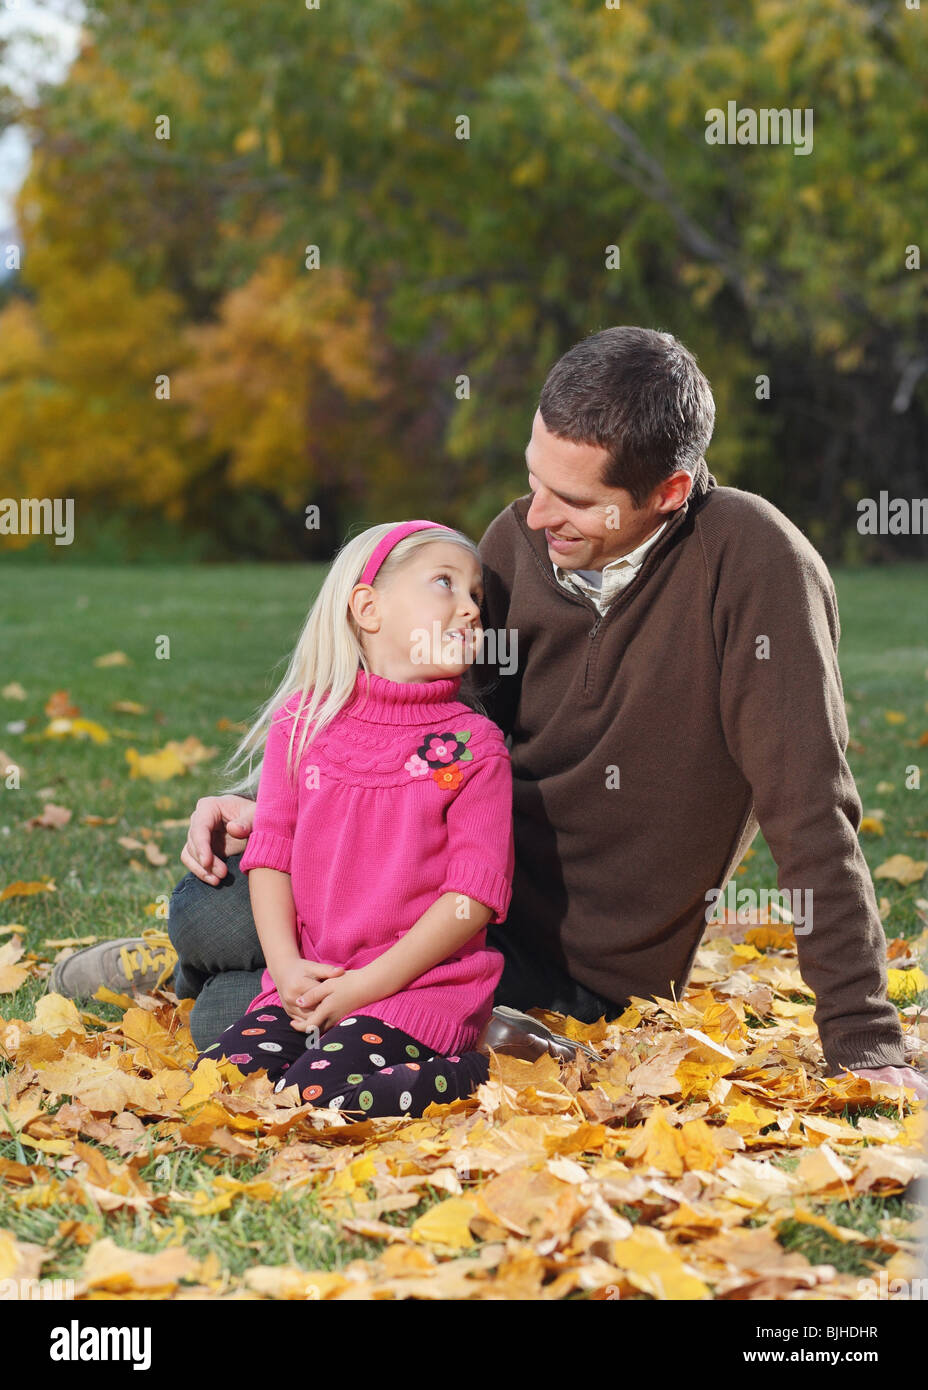 attractive father and daughter sitting in autumn leaves outdoors Stock Photo